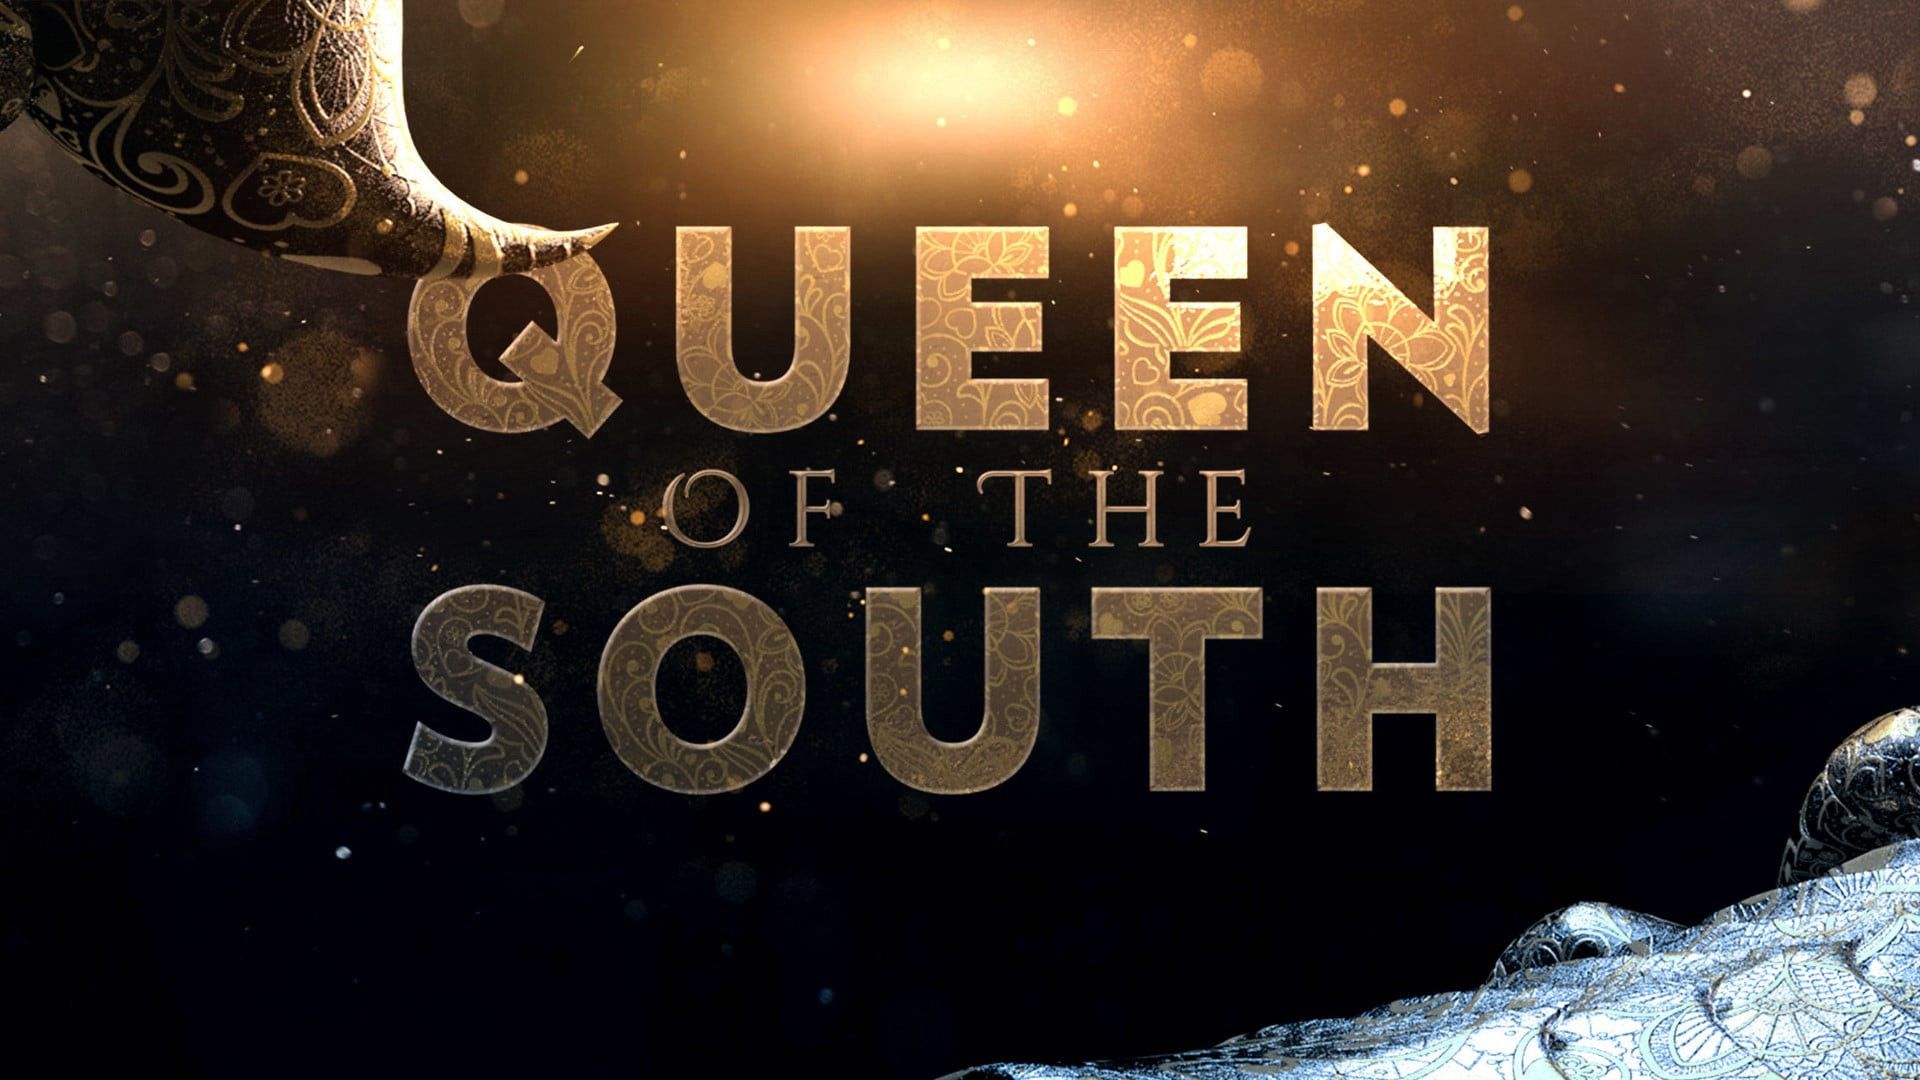 Queen Of The South F.C. Wallpapers